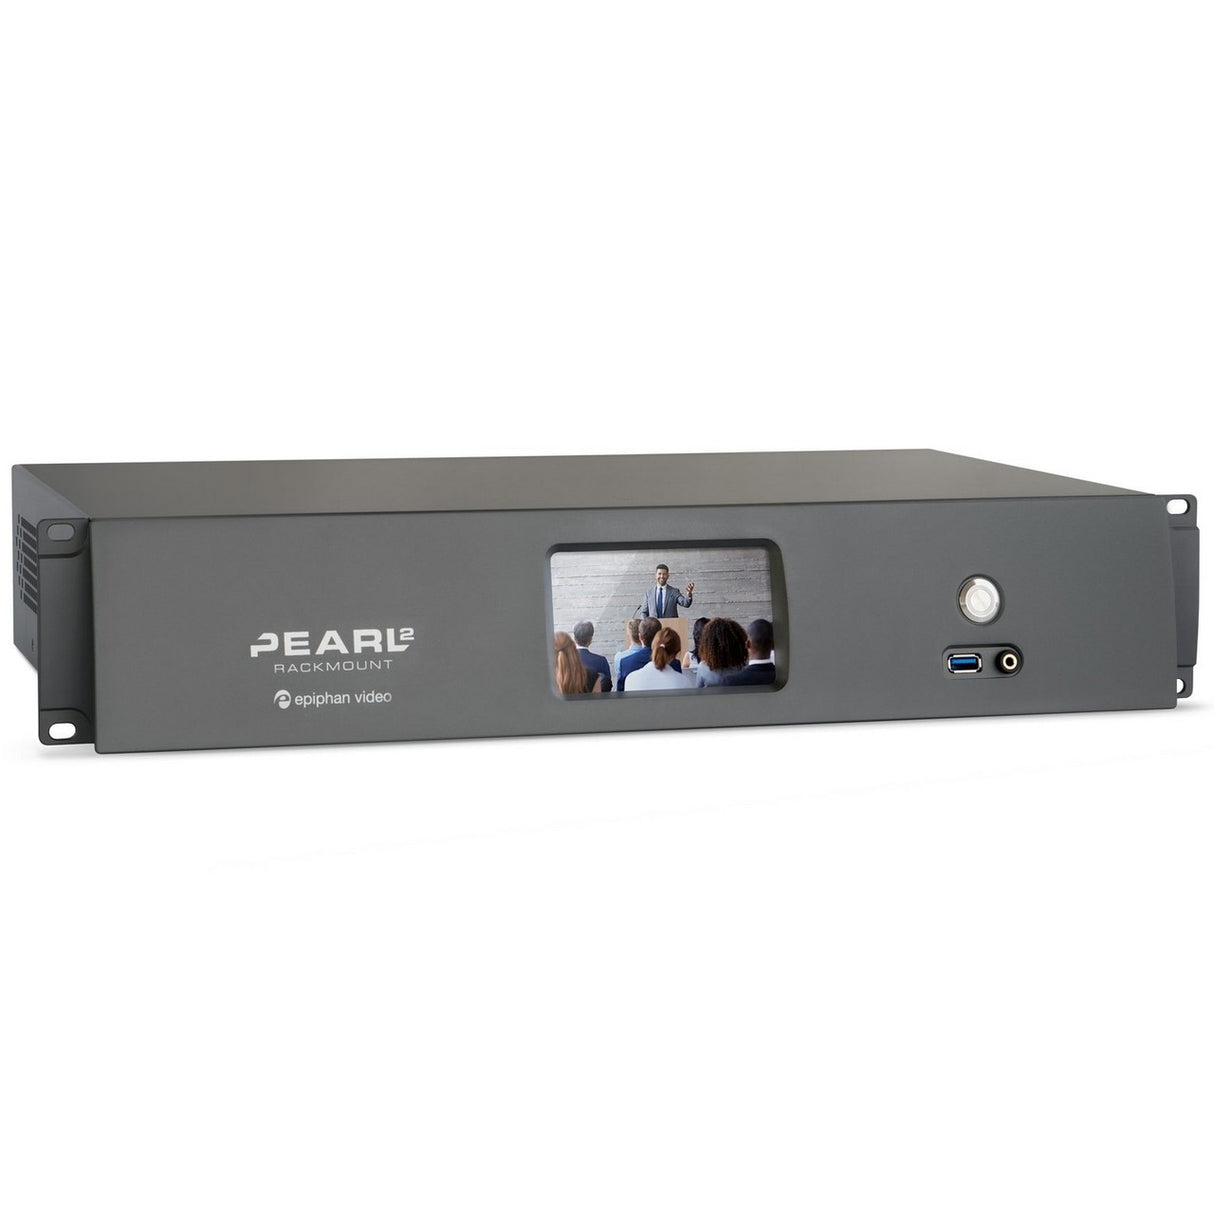 Epiphan Pearl 2 Rackmount Live Video Switching, Streaming and Recording Device